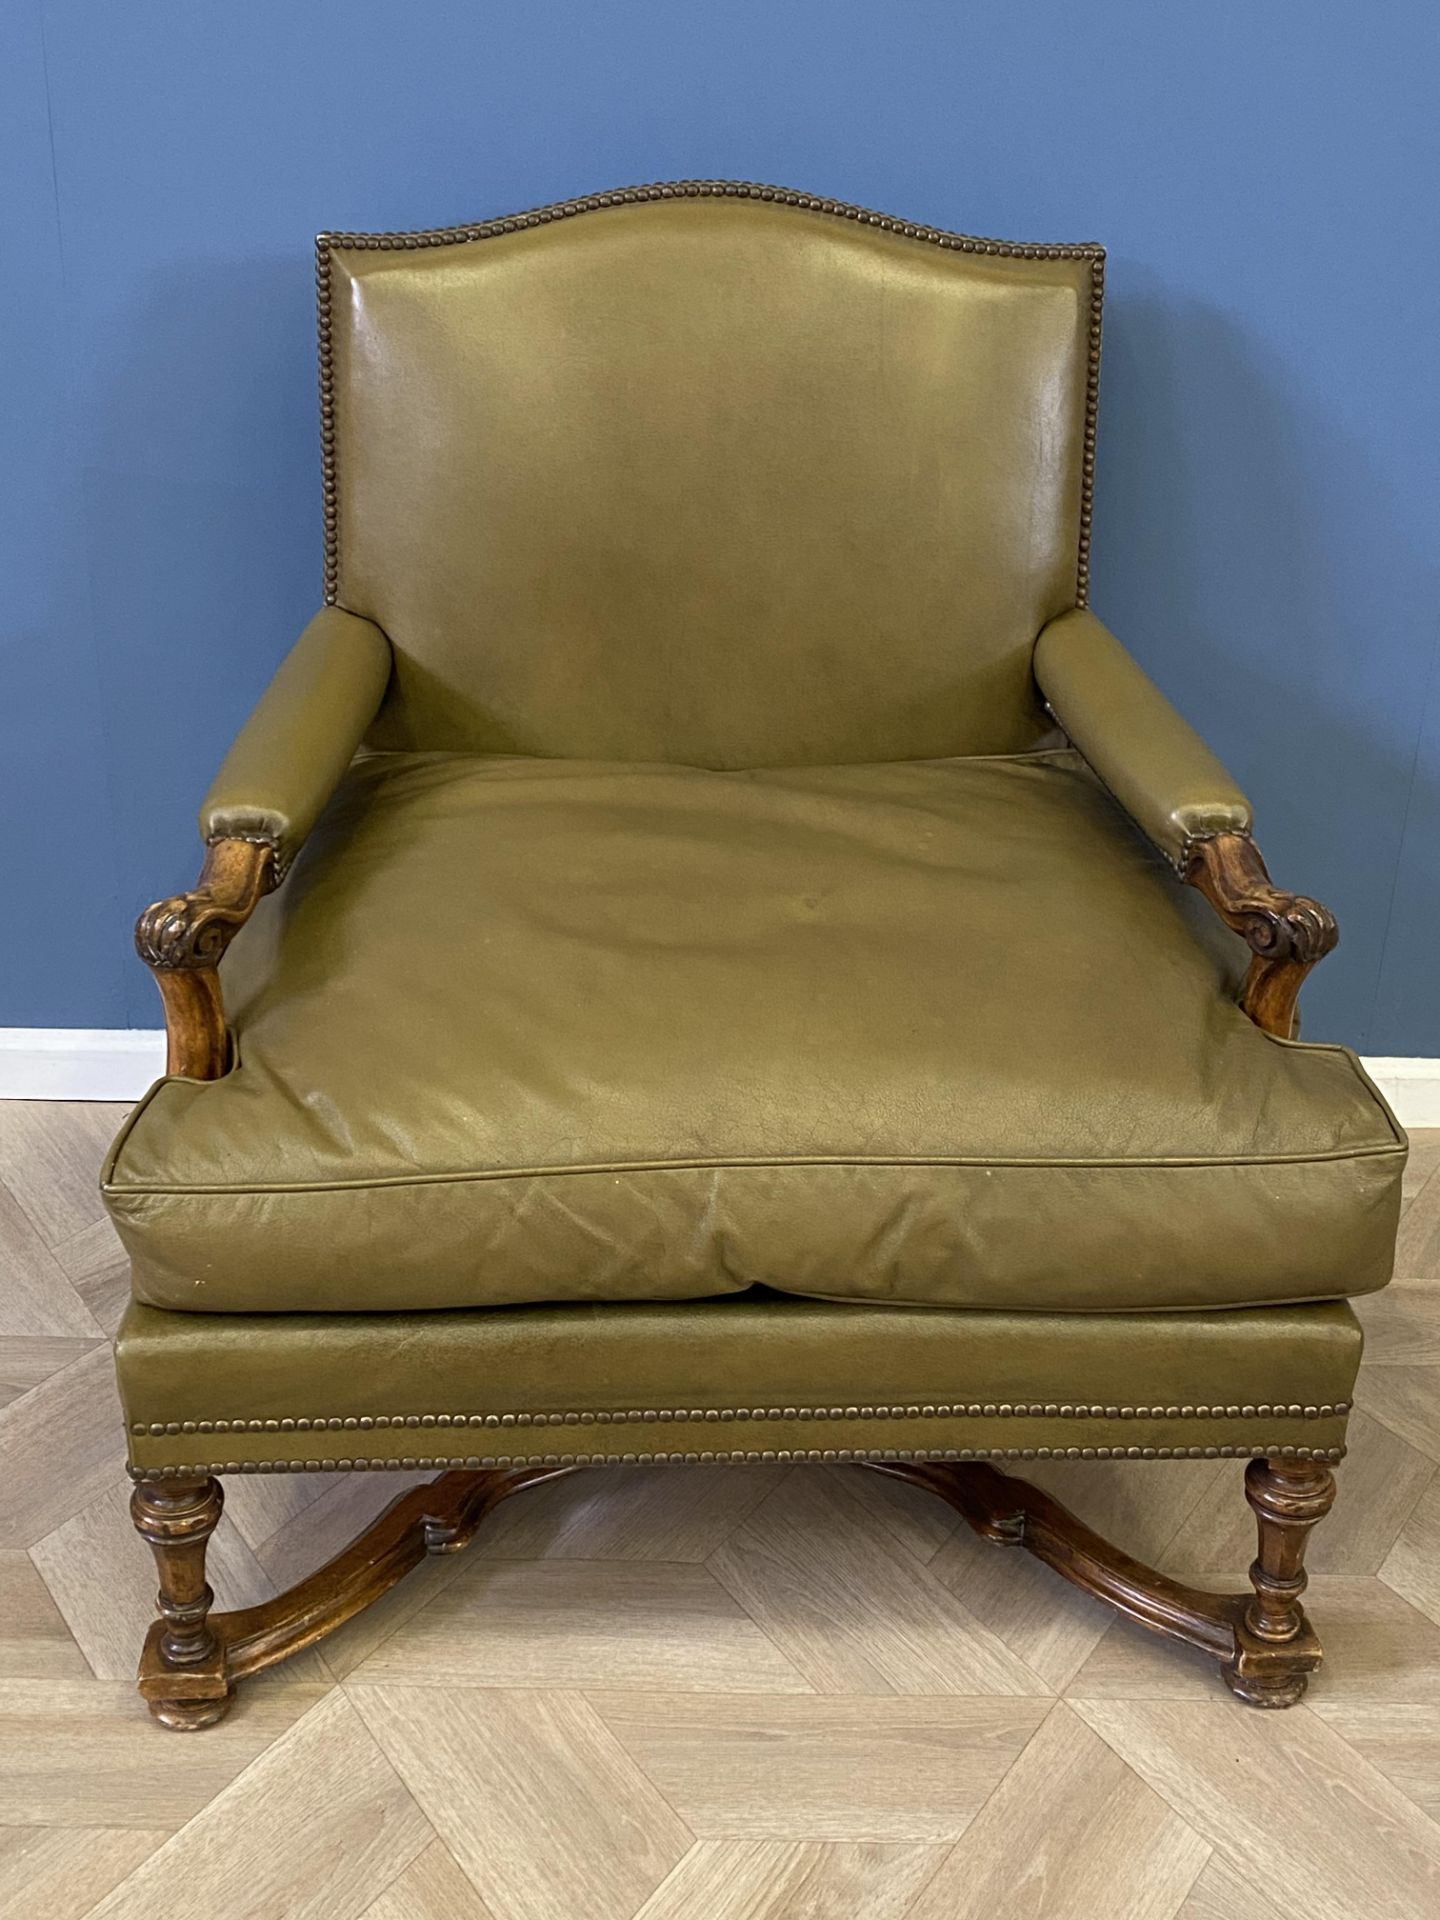 Pair of green leather armchairs - Image 5 of 12